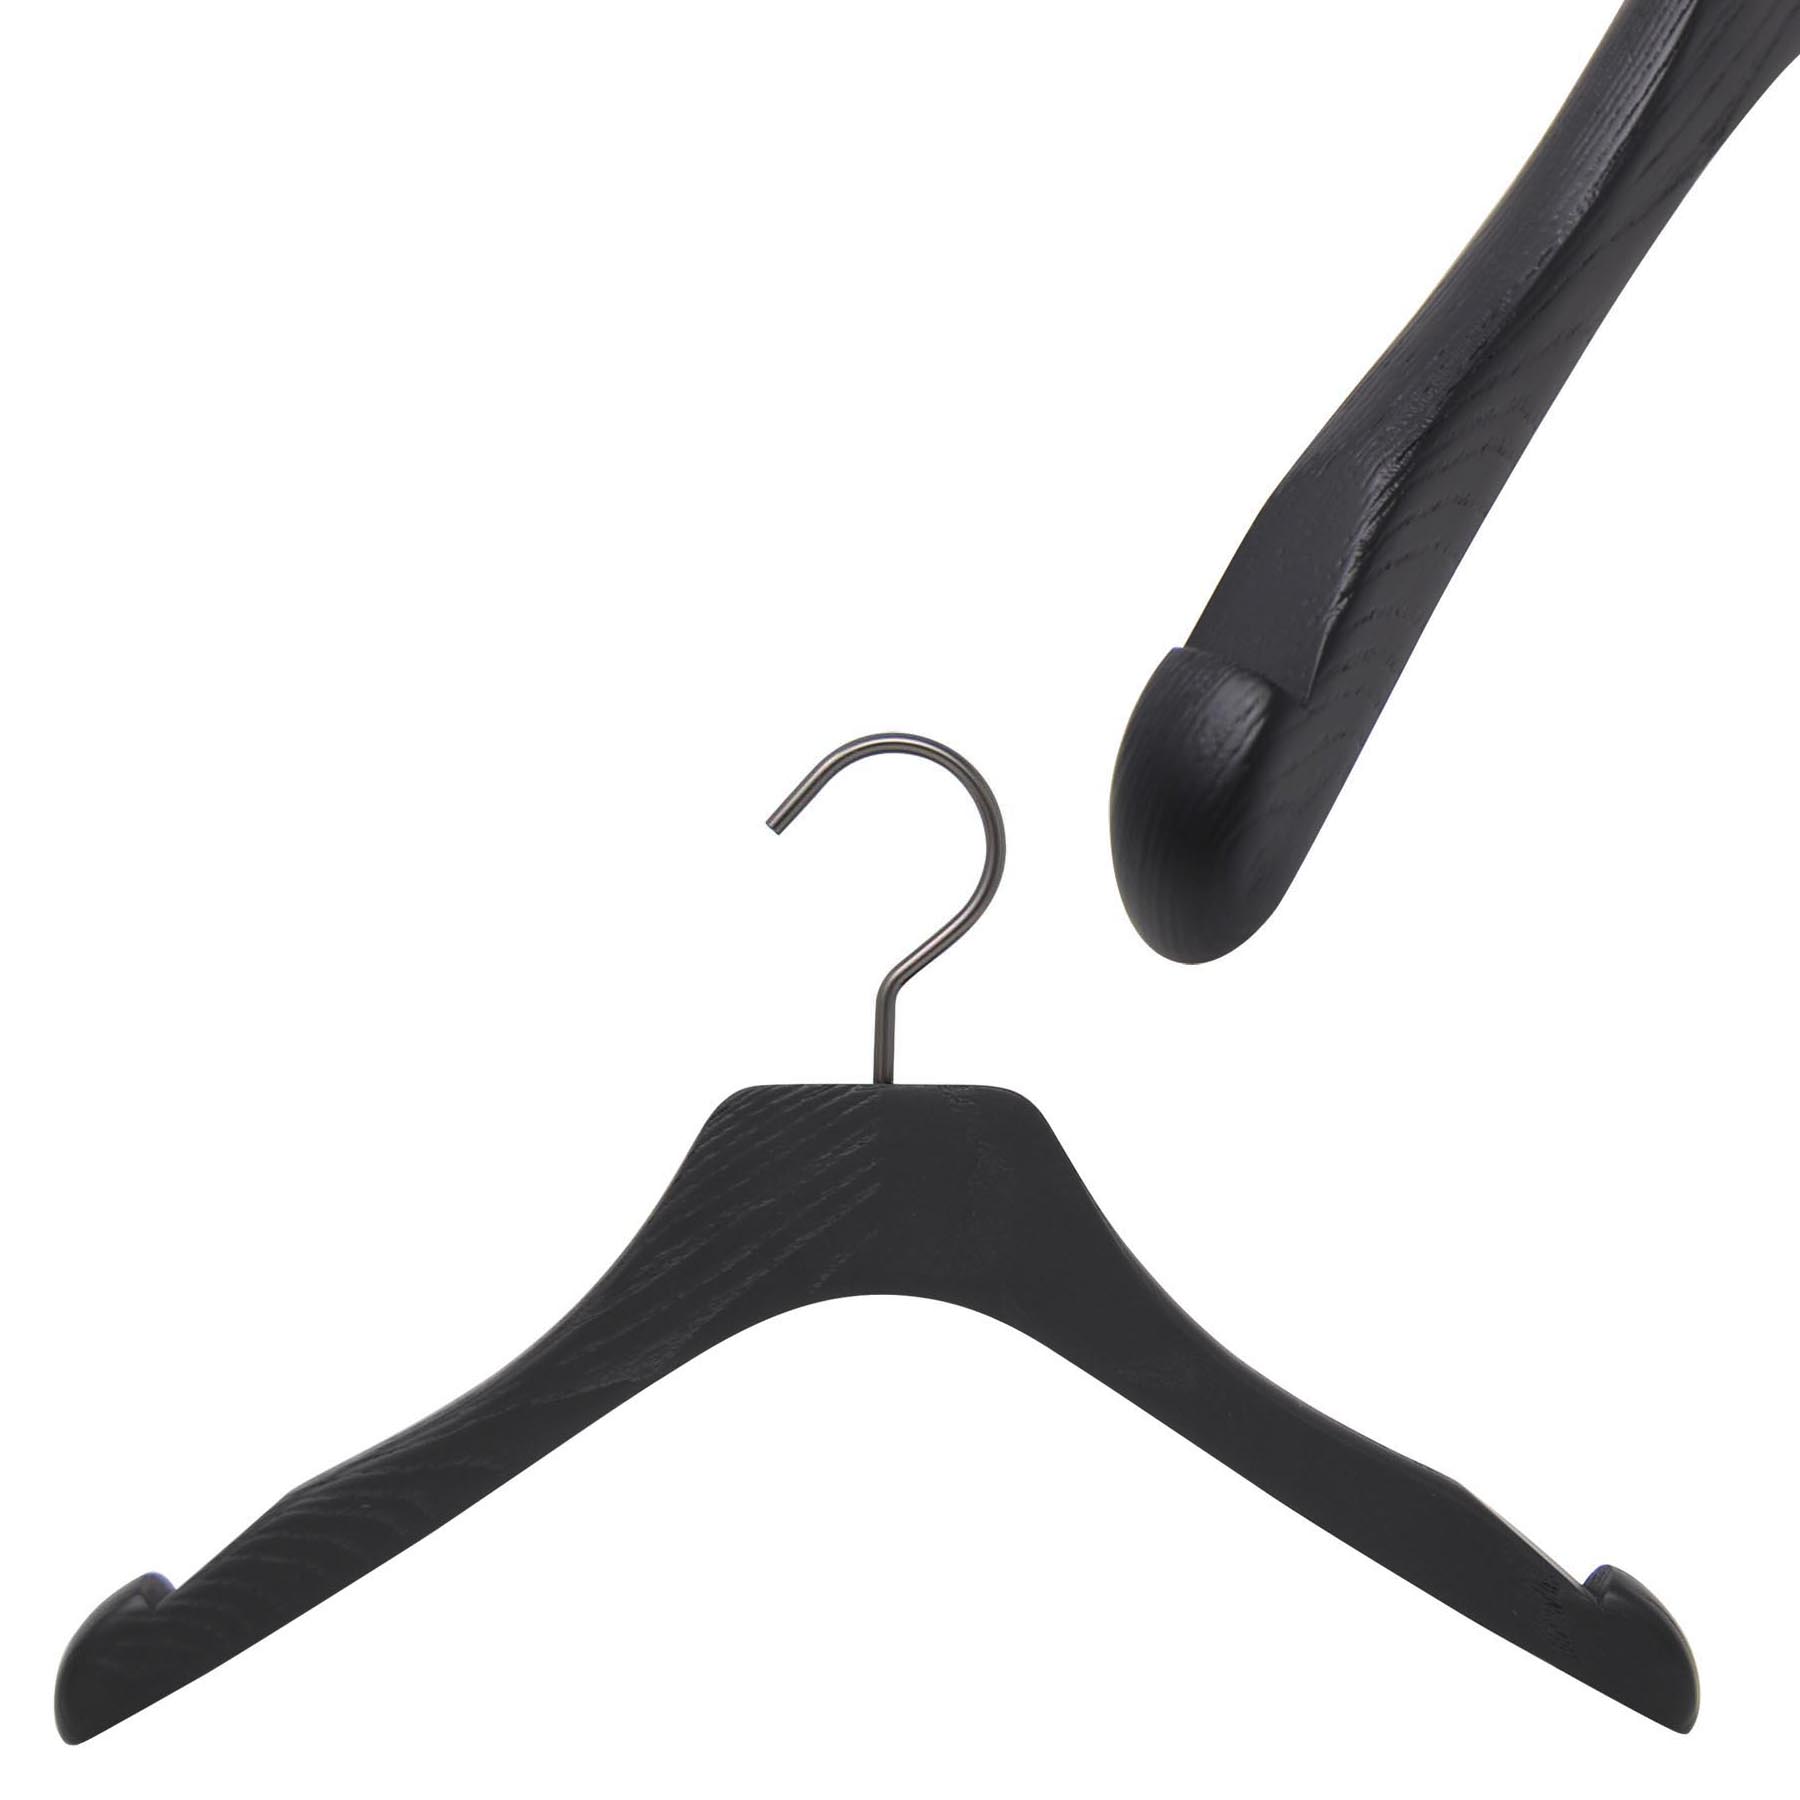 Set of hangers for all women's clothing. Modern luxury and noble wood hangers